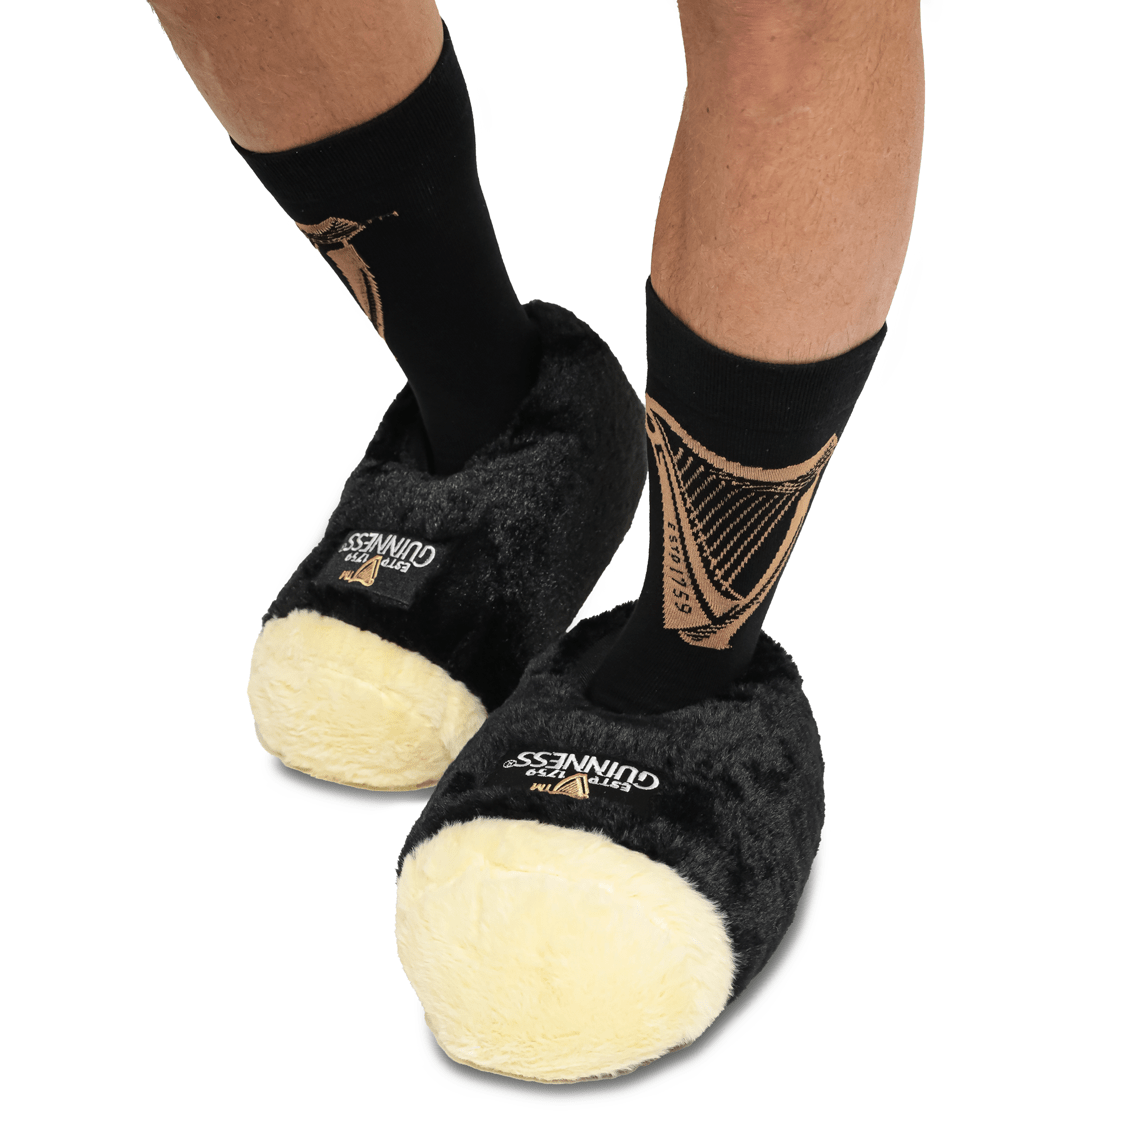 A man wearing a pair of black and gold Guinness Pint slippers.